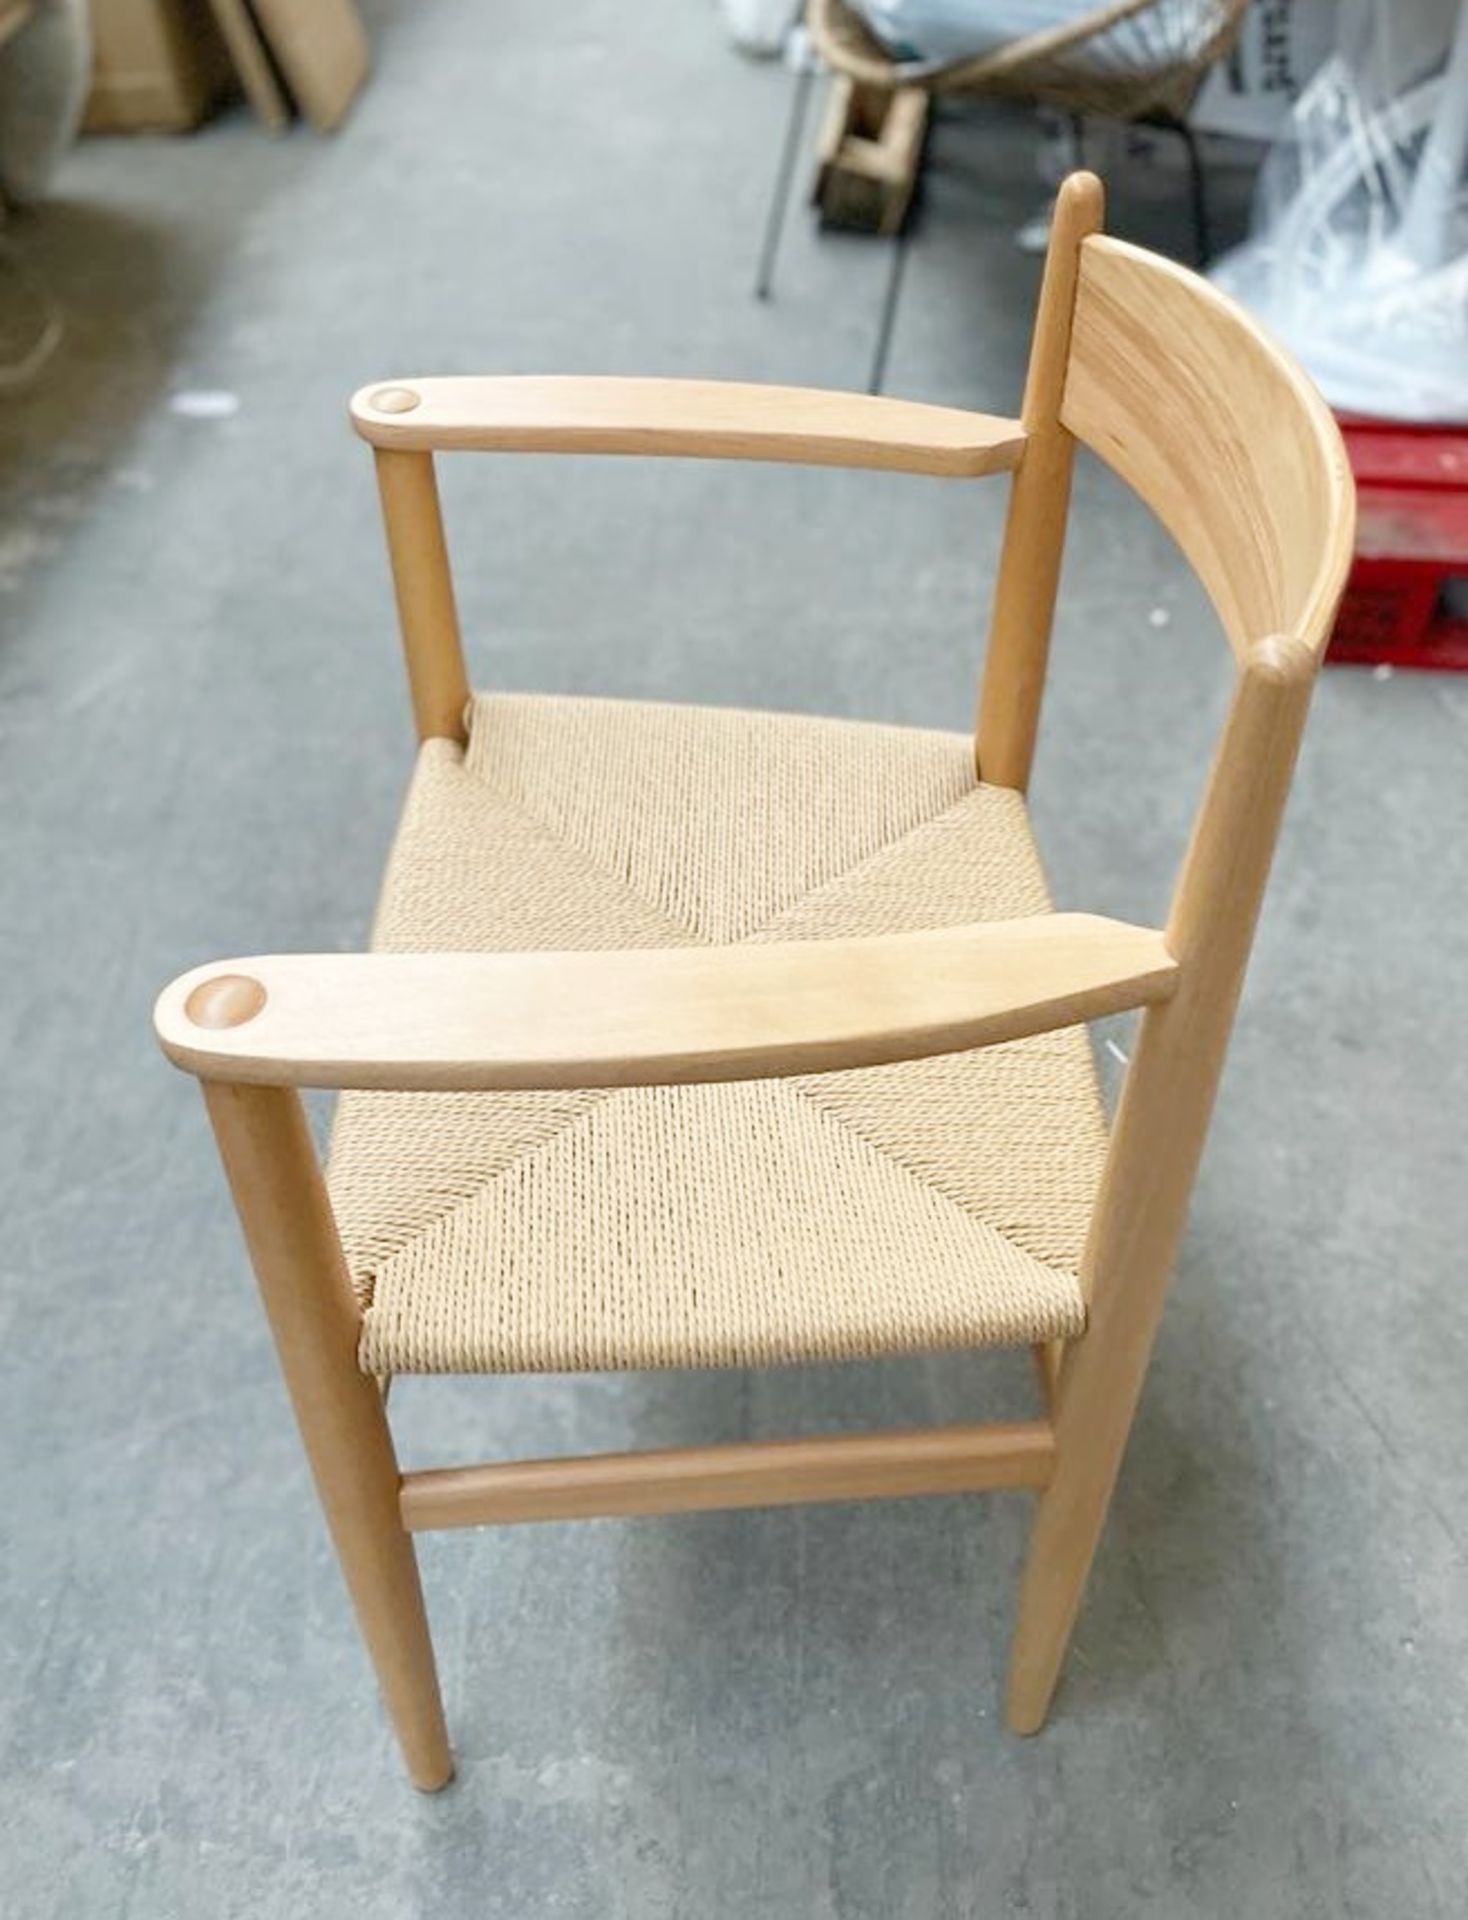 2 x Nielsen Natural + Natural Cord Chair With Arm Rests - Dimensions: 50(h) x 48(d) x 58(w) cm - - Image 5 of 7